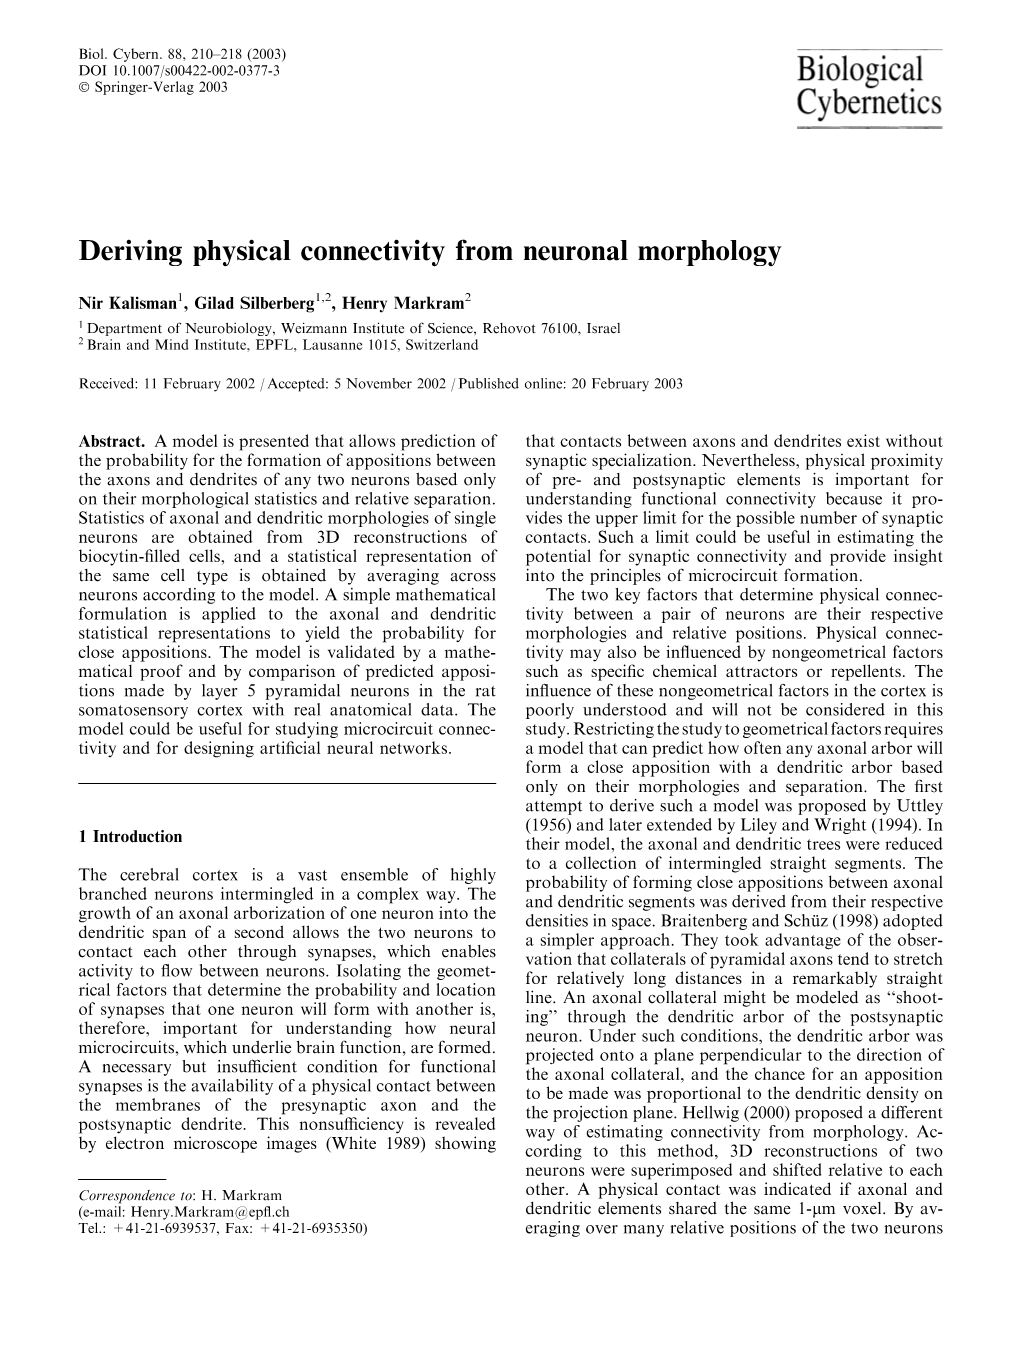 Deriving Physical Connectivity from Neuronal Morphology